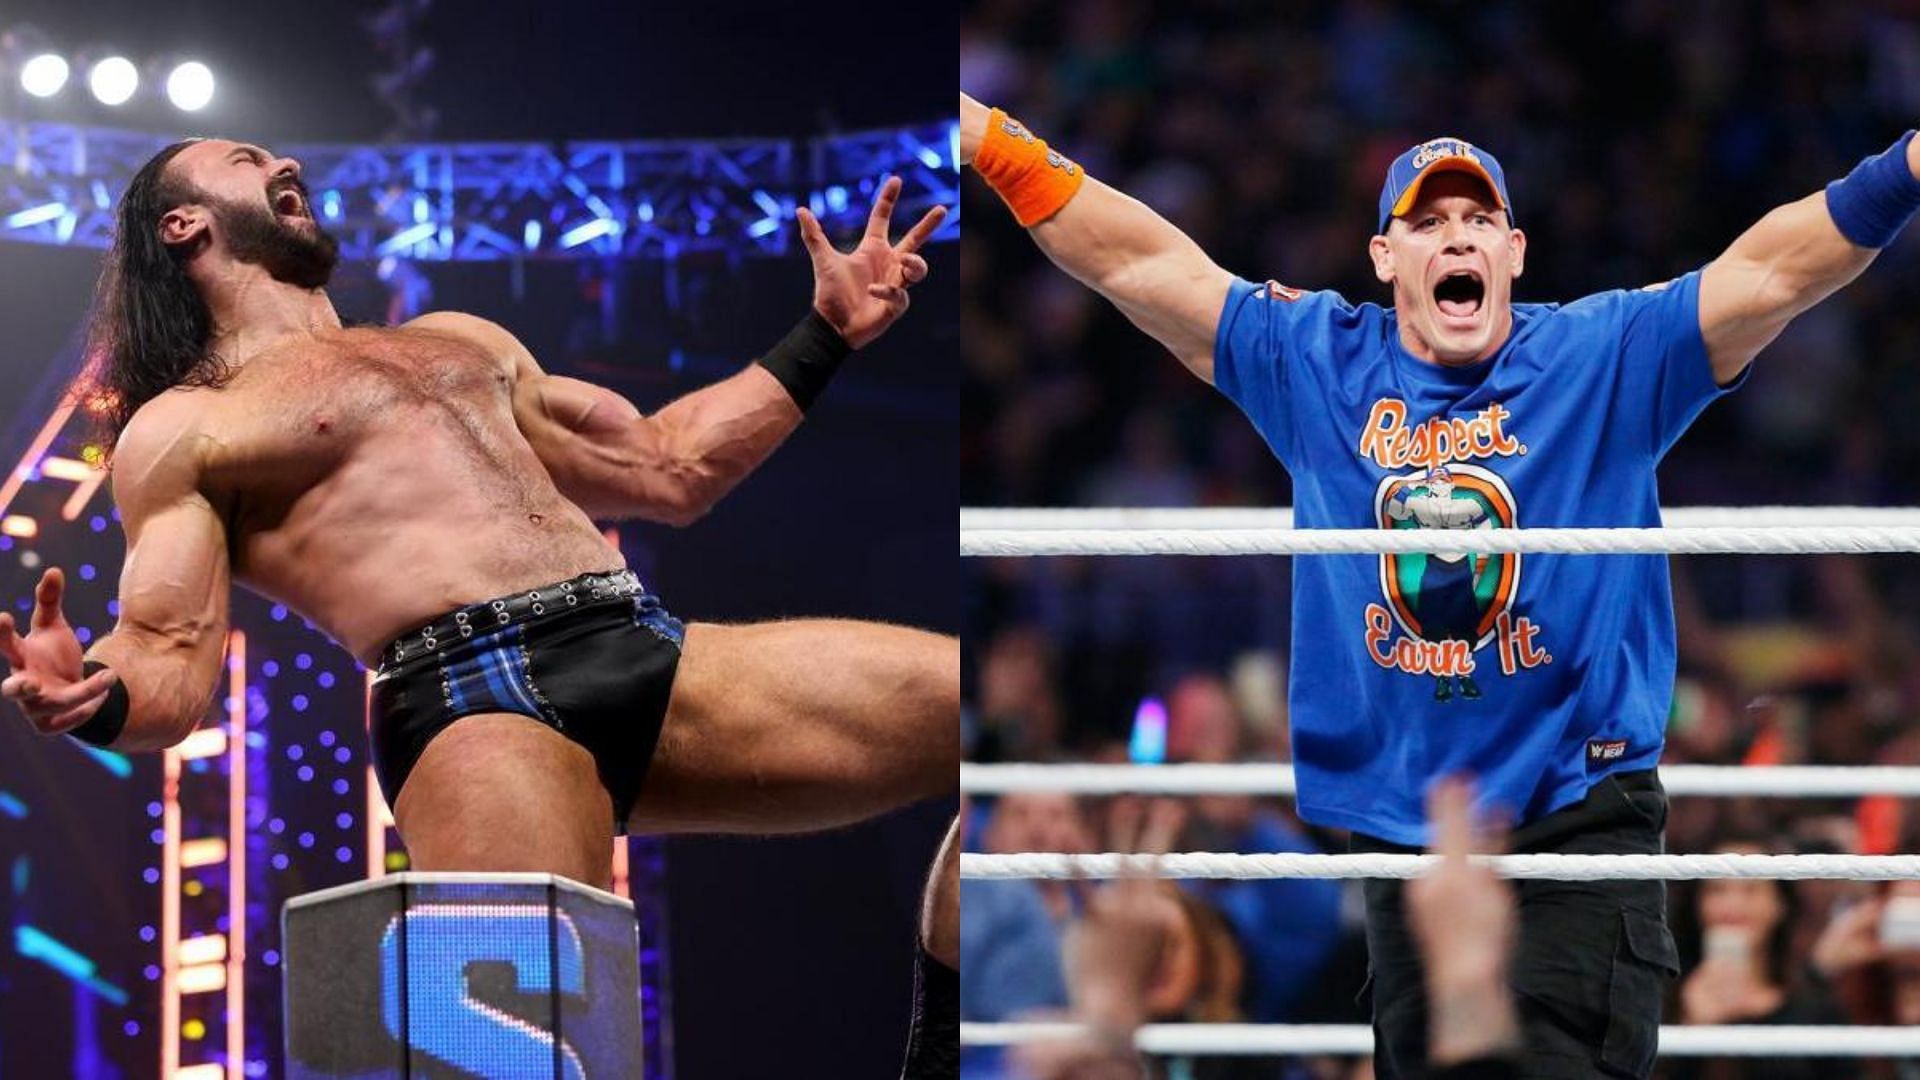 The Scottish Warrior is on the same side as the Cenation Leader